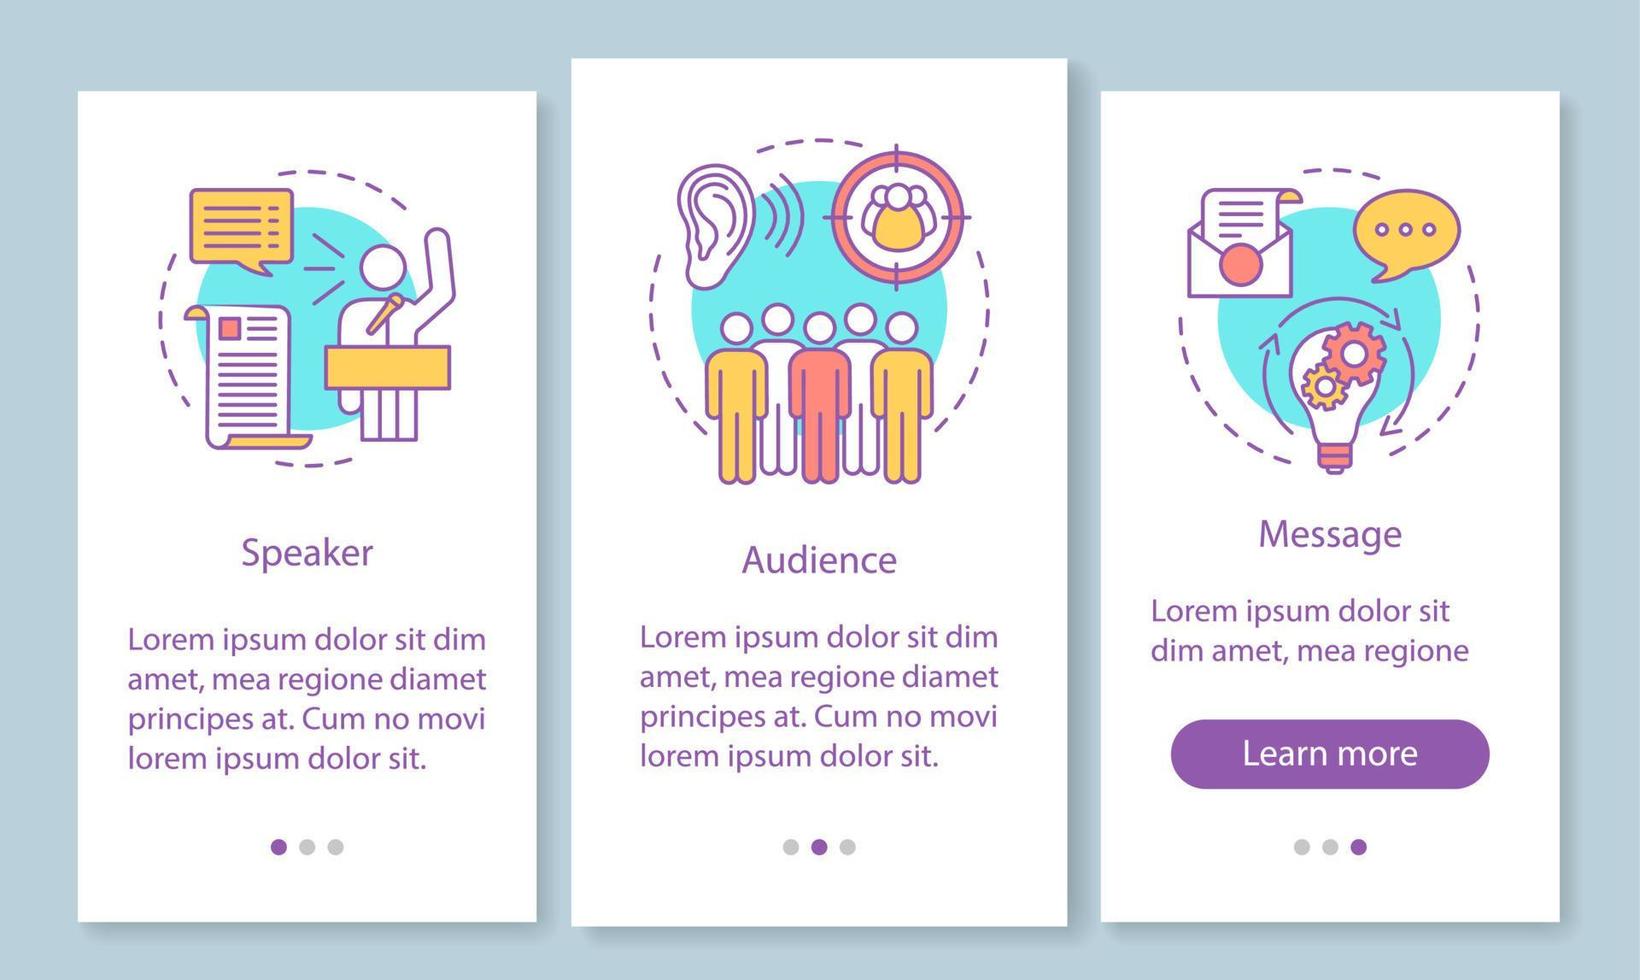 Rhetorical triangle onboarding mobile app page screen with linear concepts. Leadership skills. Speaker, audience, message walkthrough graphic instructions. UX, UI, GUI template with illustrations vector